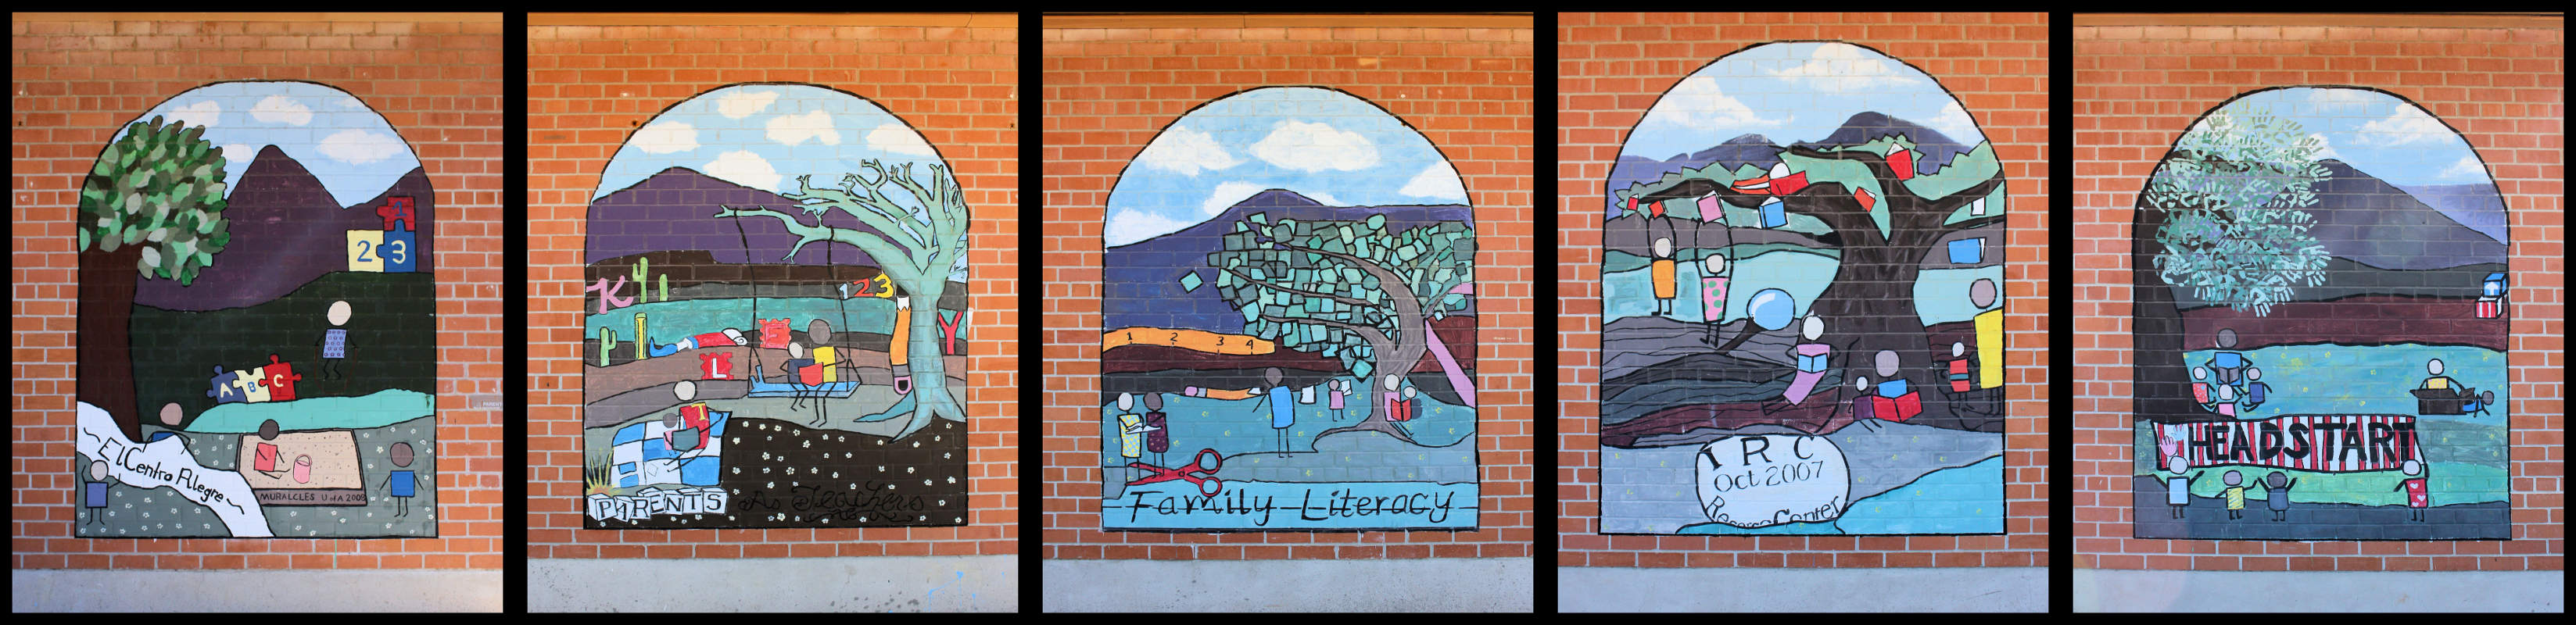 Mission Manor Elementary Head Start mural 2 of 2, photos and stitching by David Aber